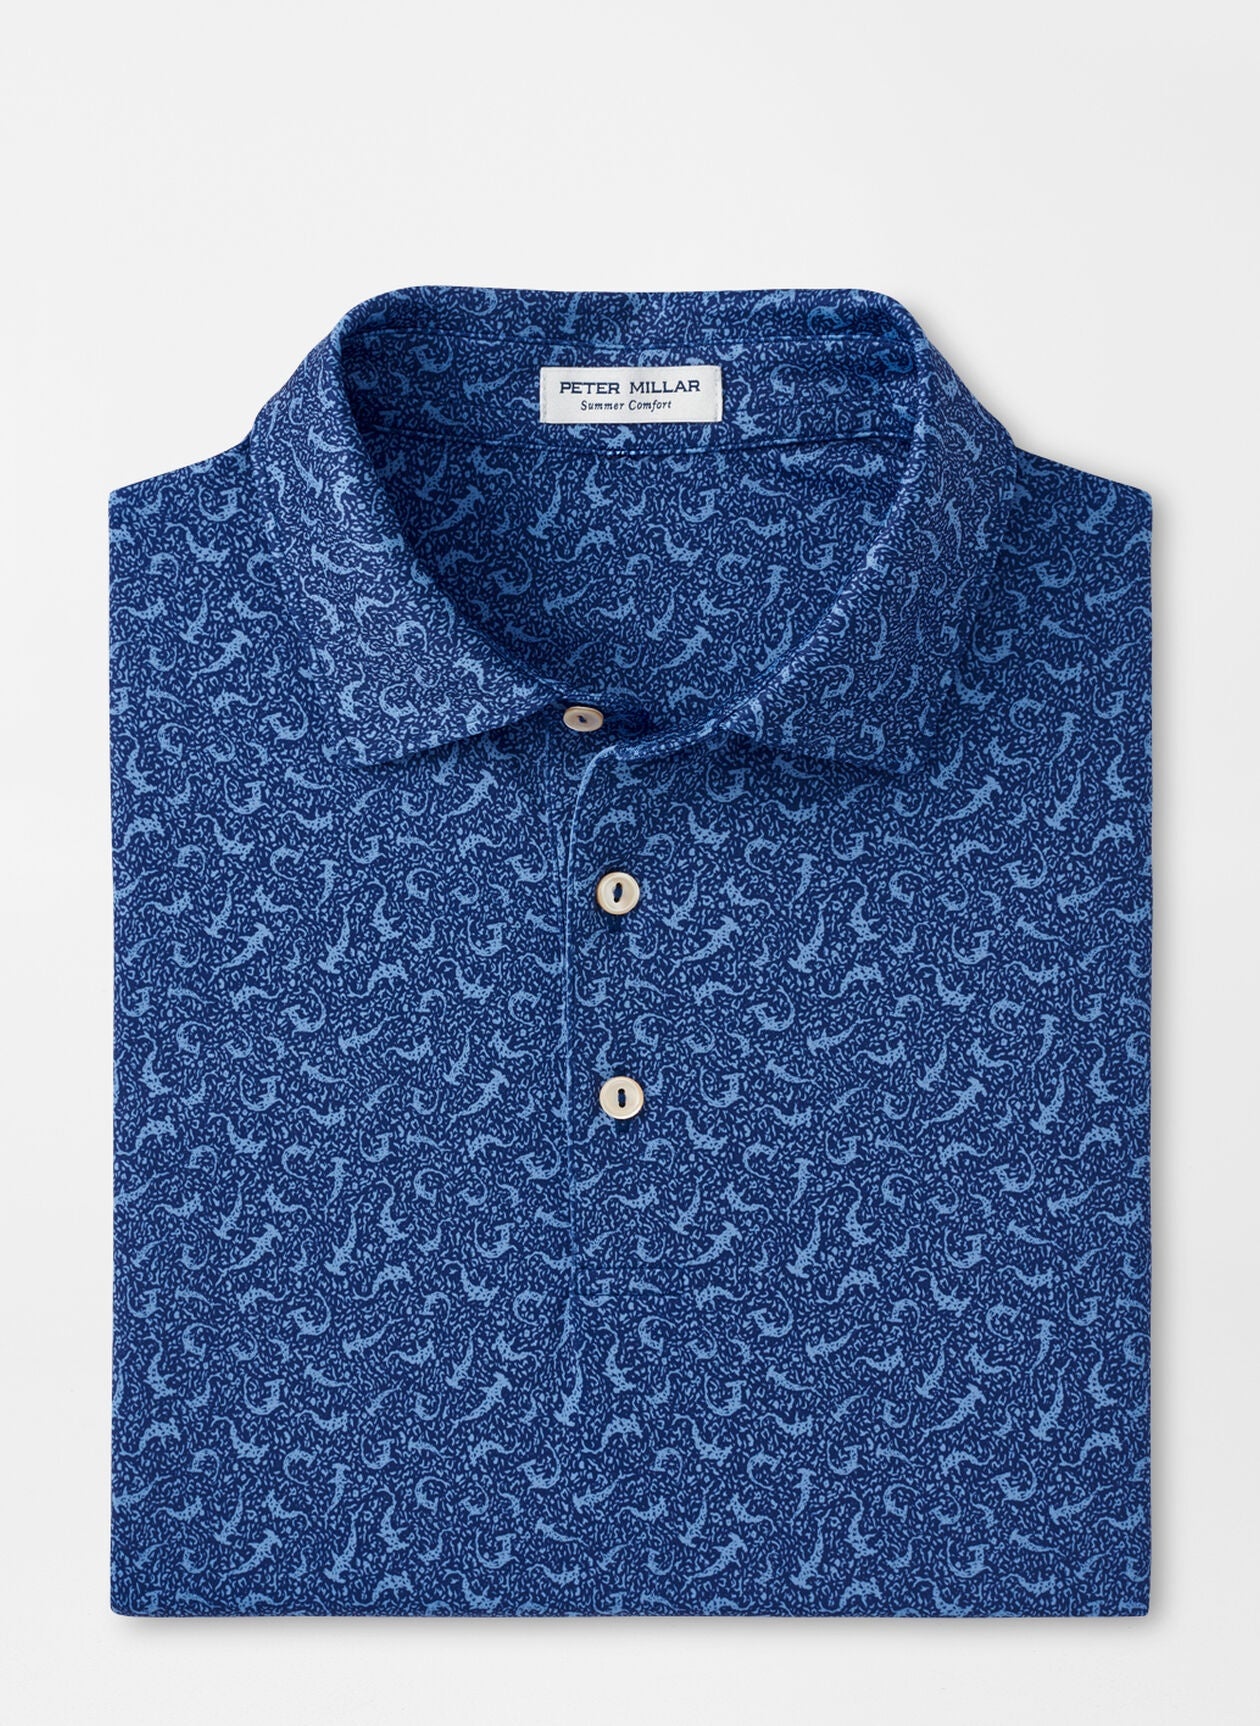 Peter Millar Hammer Time Performance Jersey Polo in Sport Navy